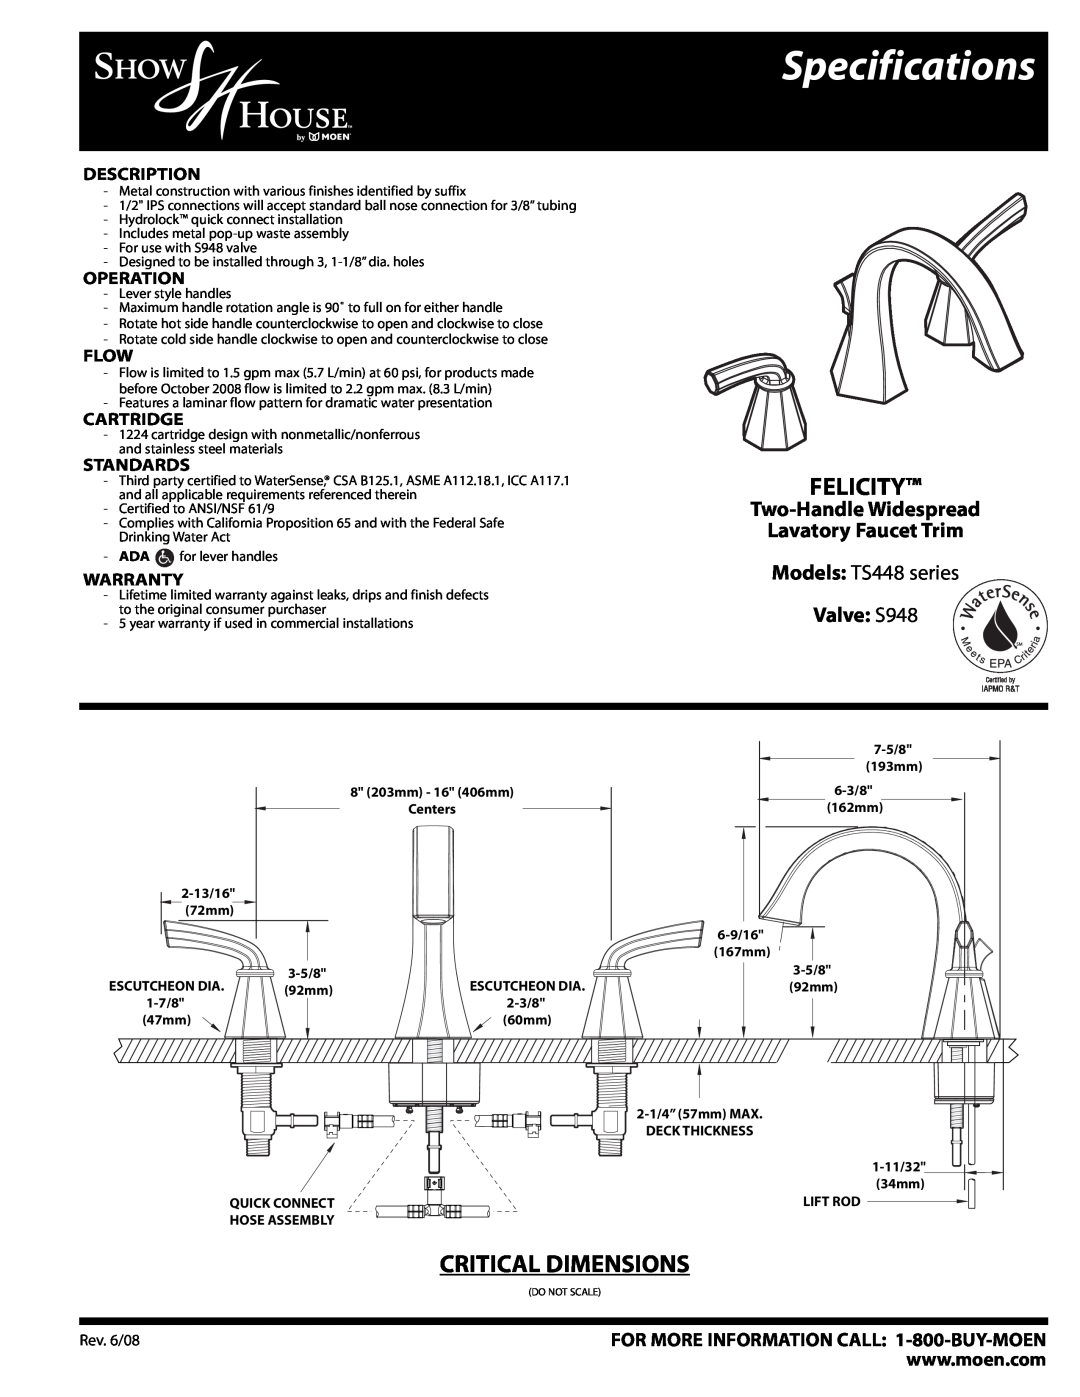 Moen TS448 Series specifications Specifications, Felicity, Critical Dimensions, Two-Handle Widespread Lavatory Faucet Trim 